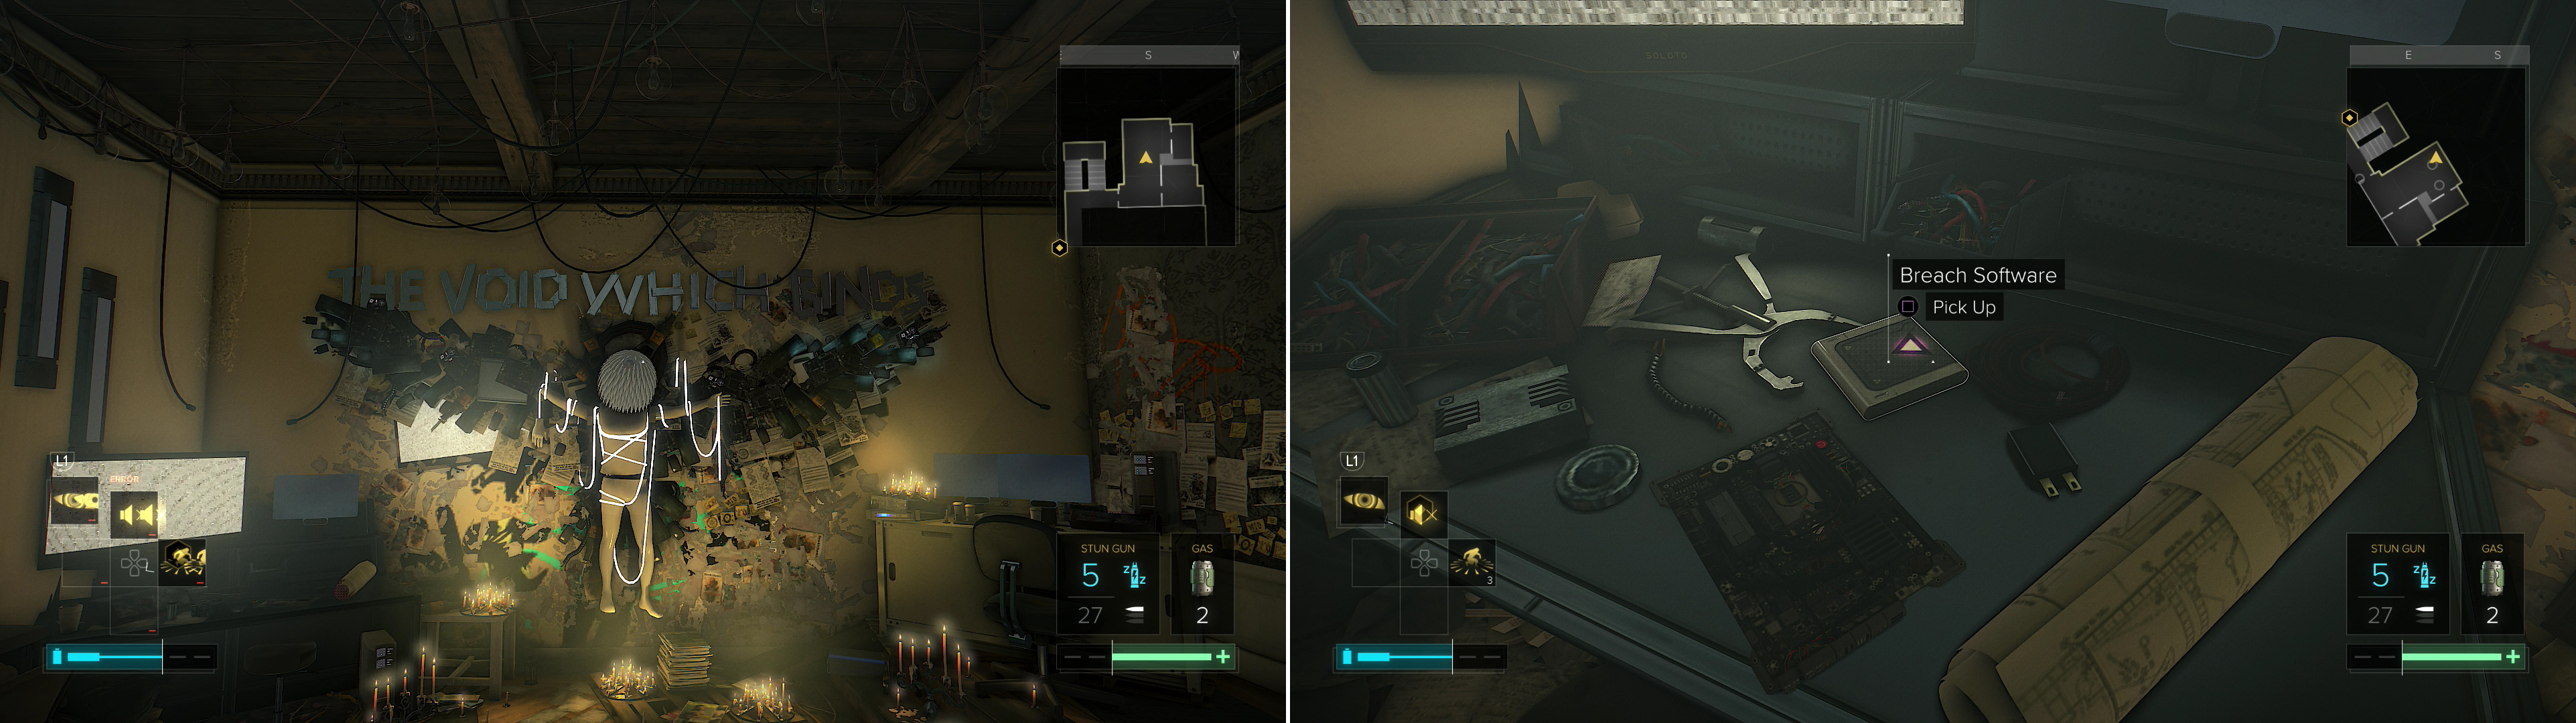 The unsettling wall decoration betray’s the password of the man in apartment #14 (left). Be sure to grab Breach Software #29 while you’re here (right).